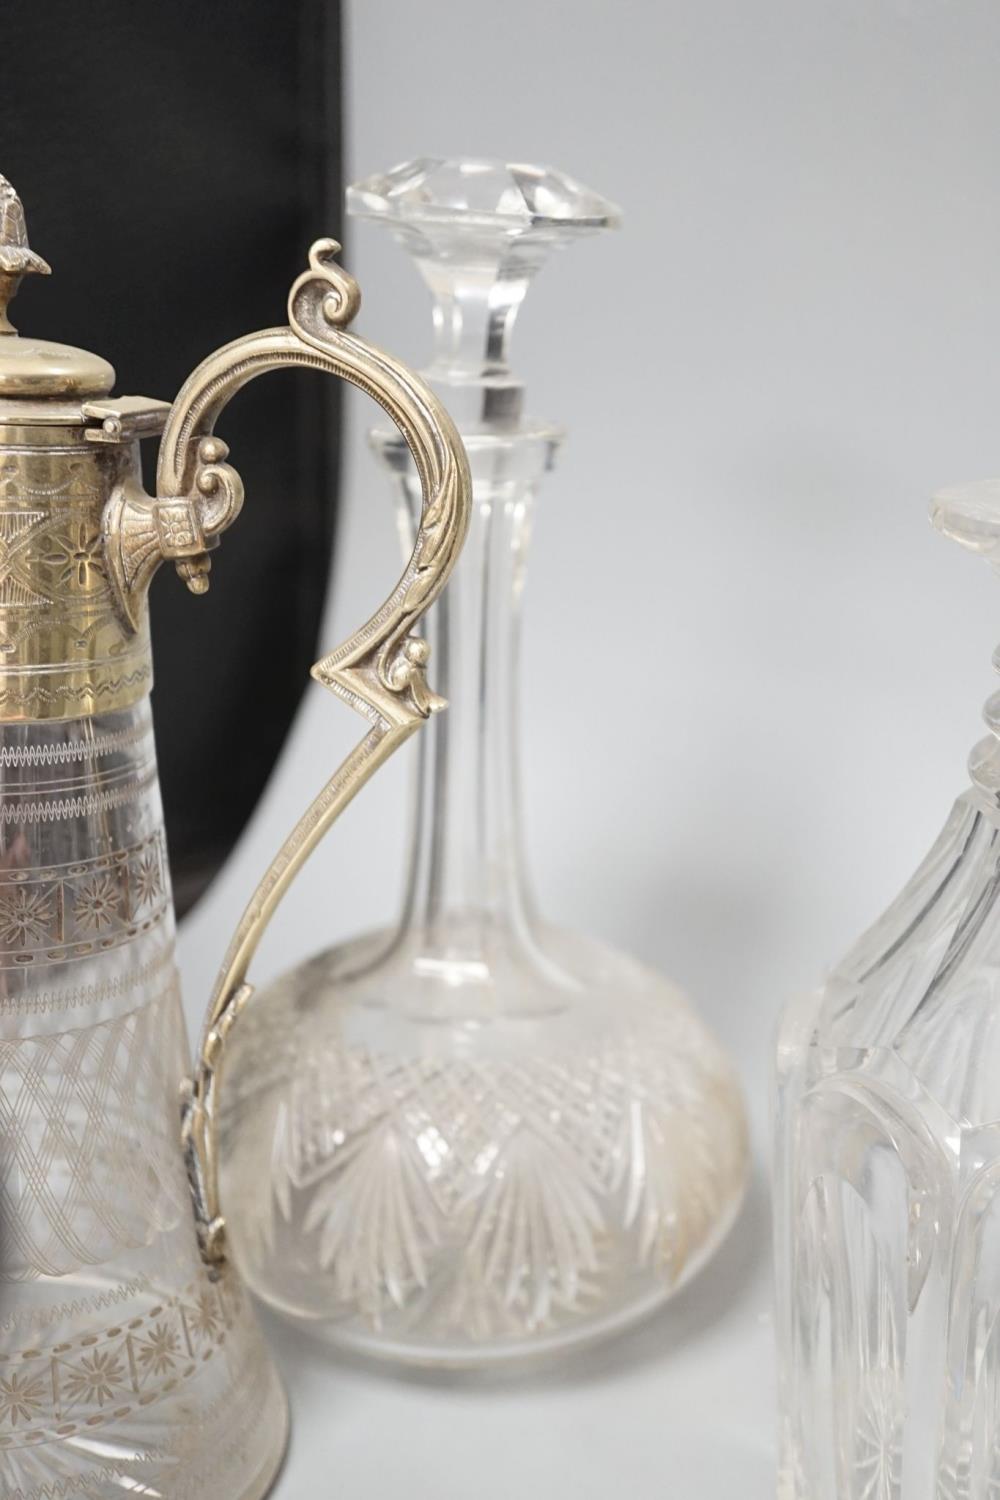 A Hukin and Heath claret jug and other decanters etc. - Image 8 of 9